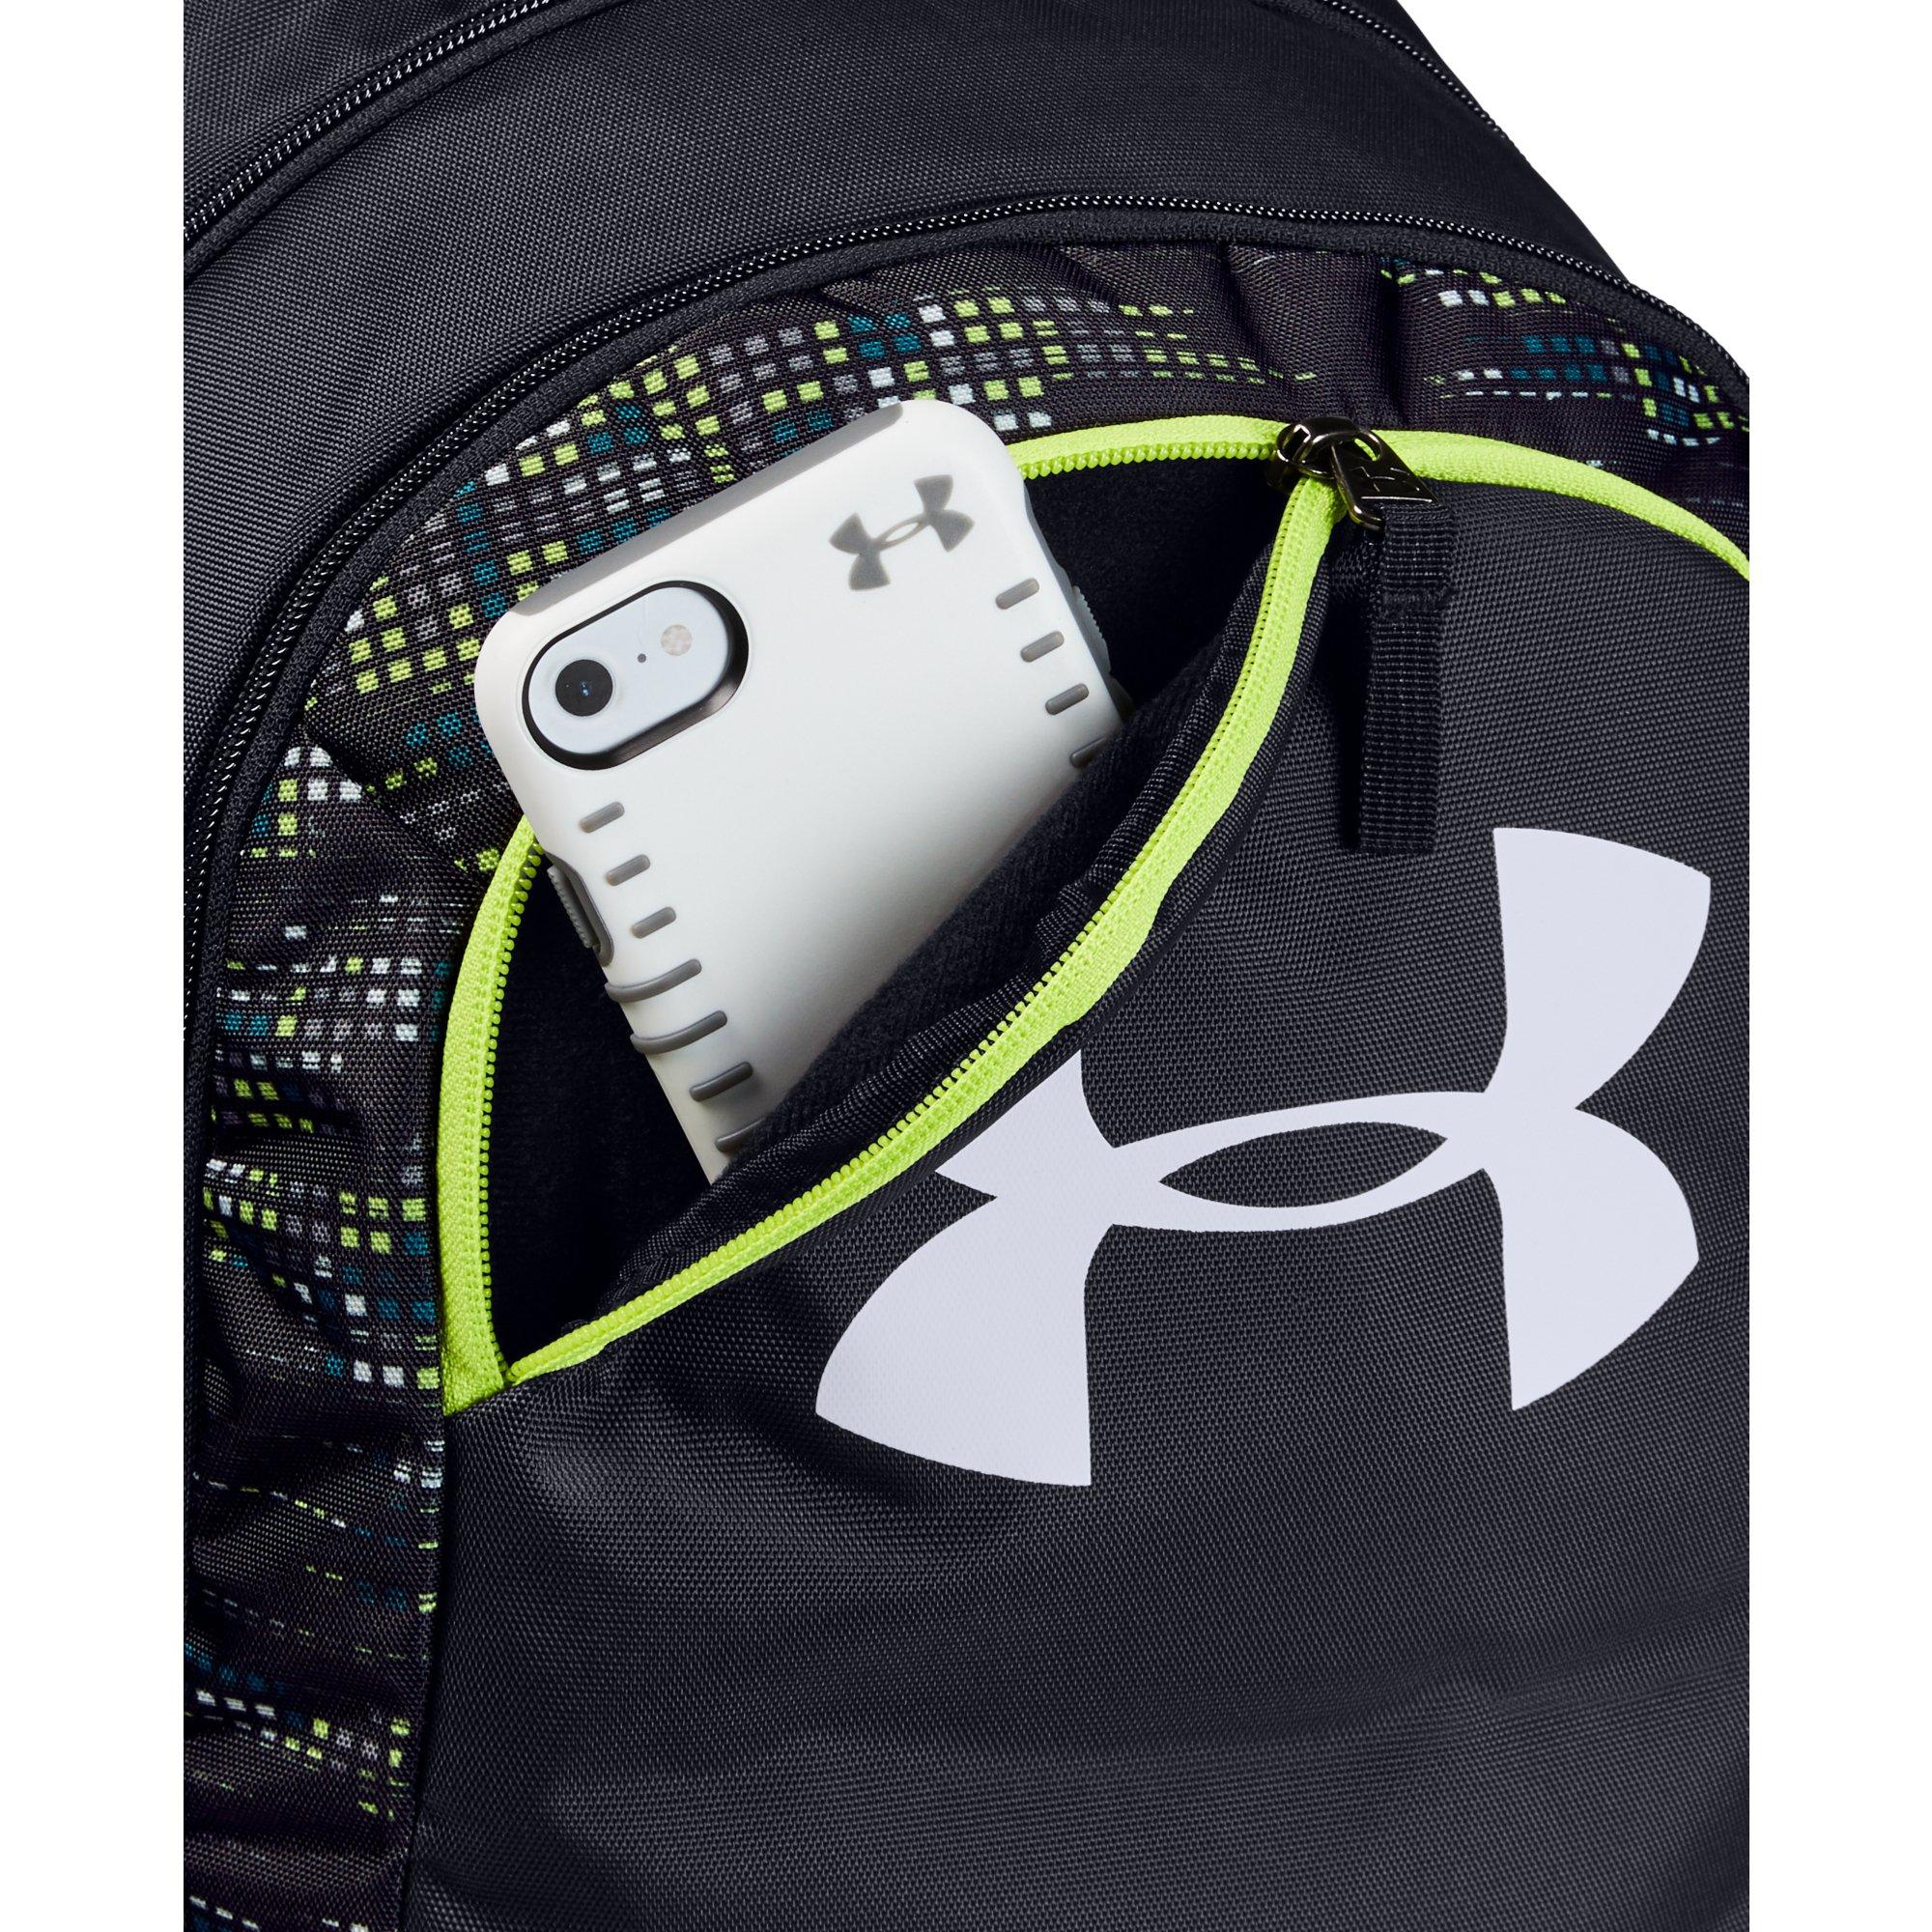 Under Armour Black South Florida Bulls Scrimmage Performance Backpack